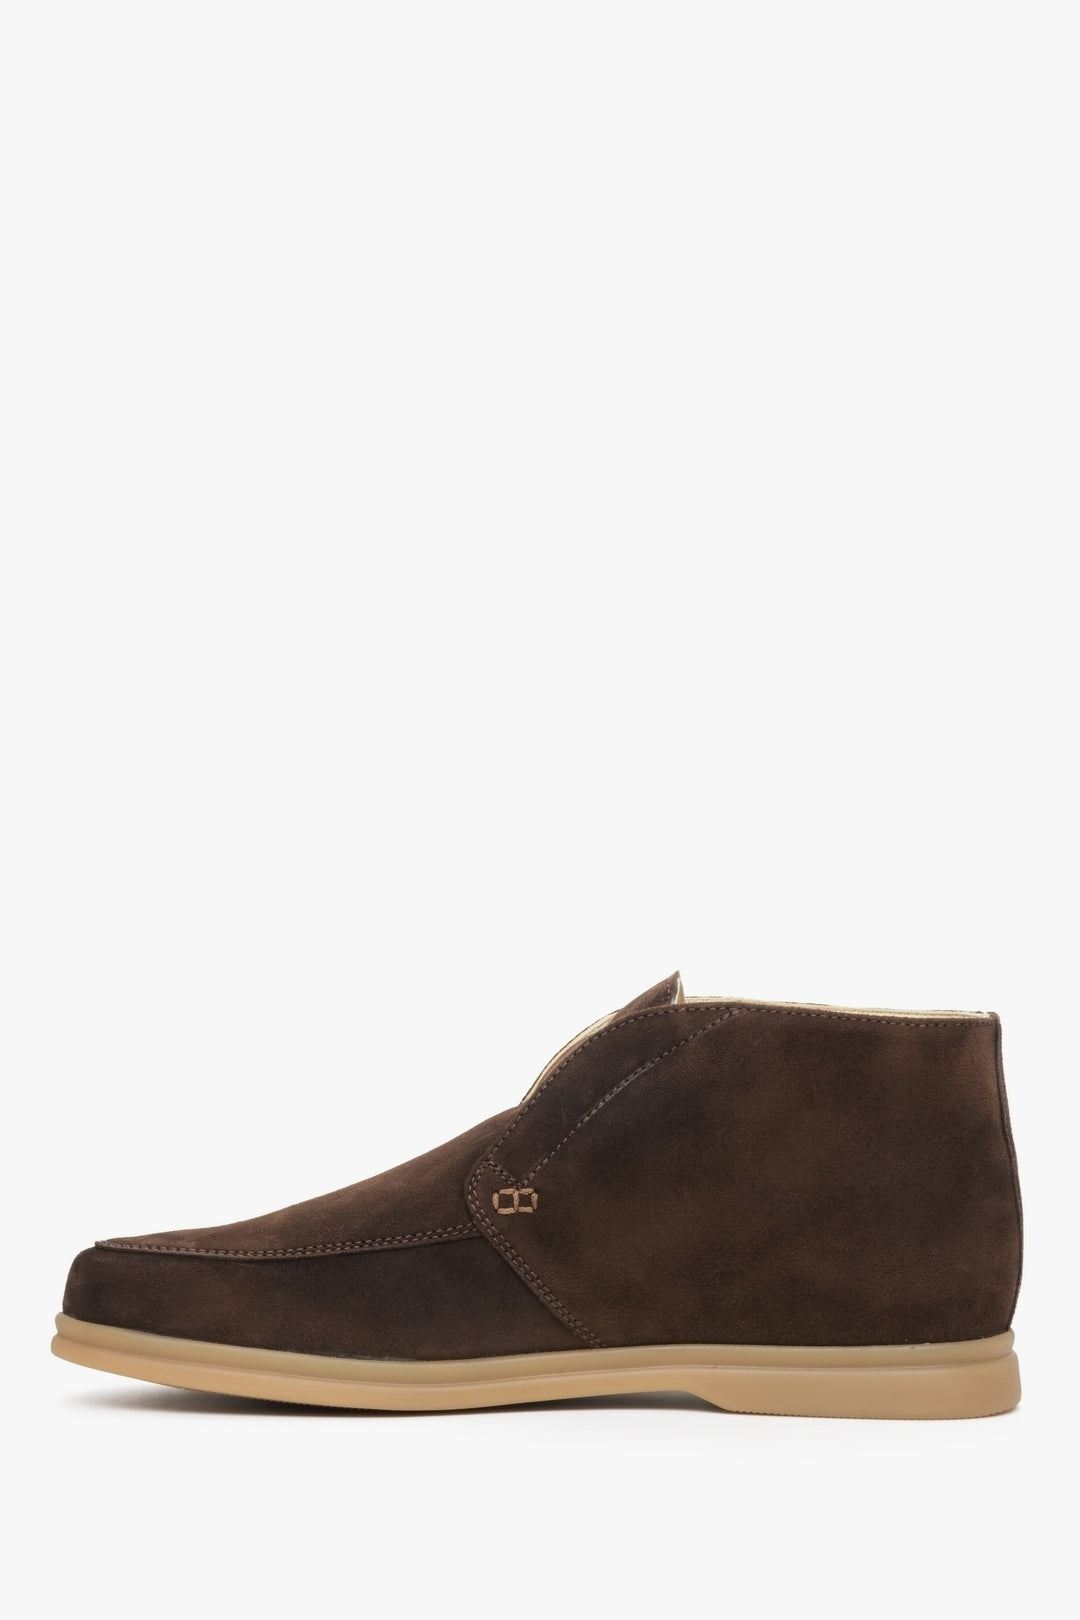 Men's brown suede ankle boots by Estro - close-up on the shoe's profile.